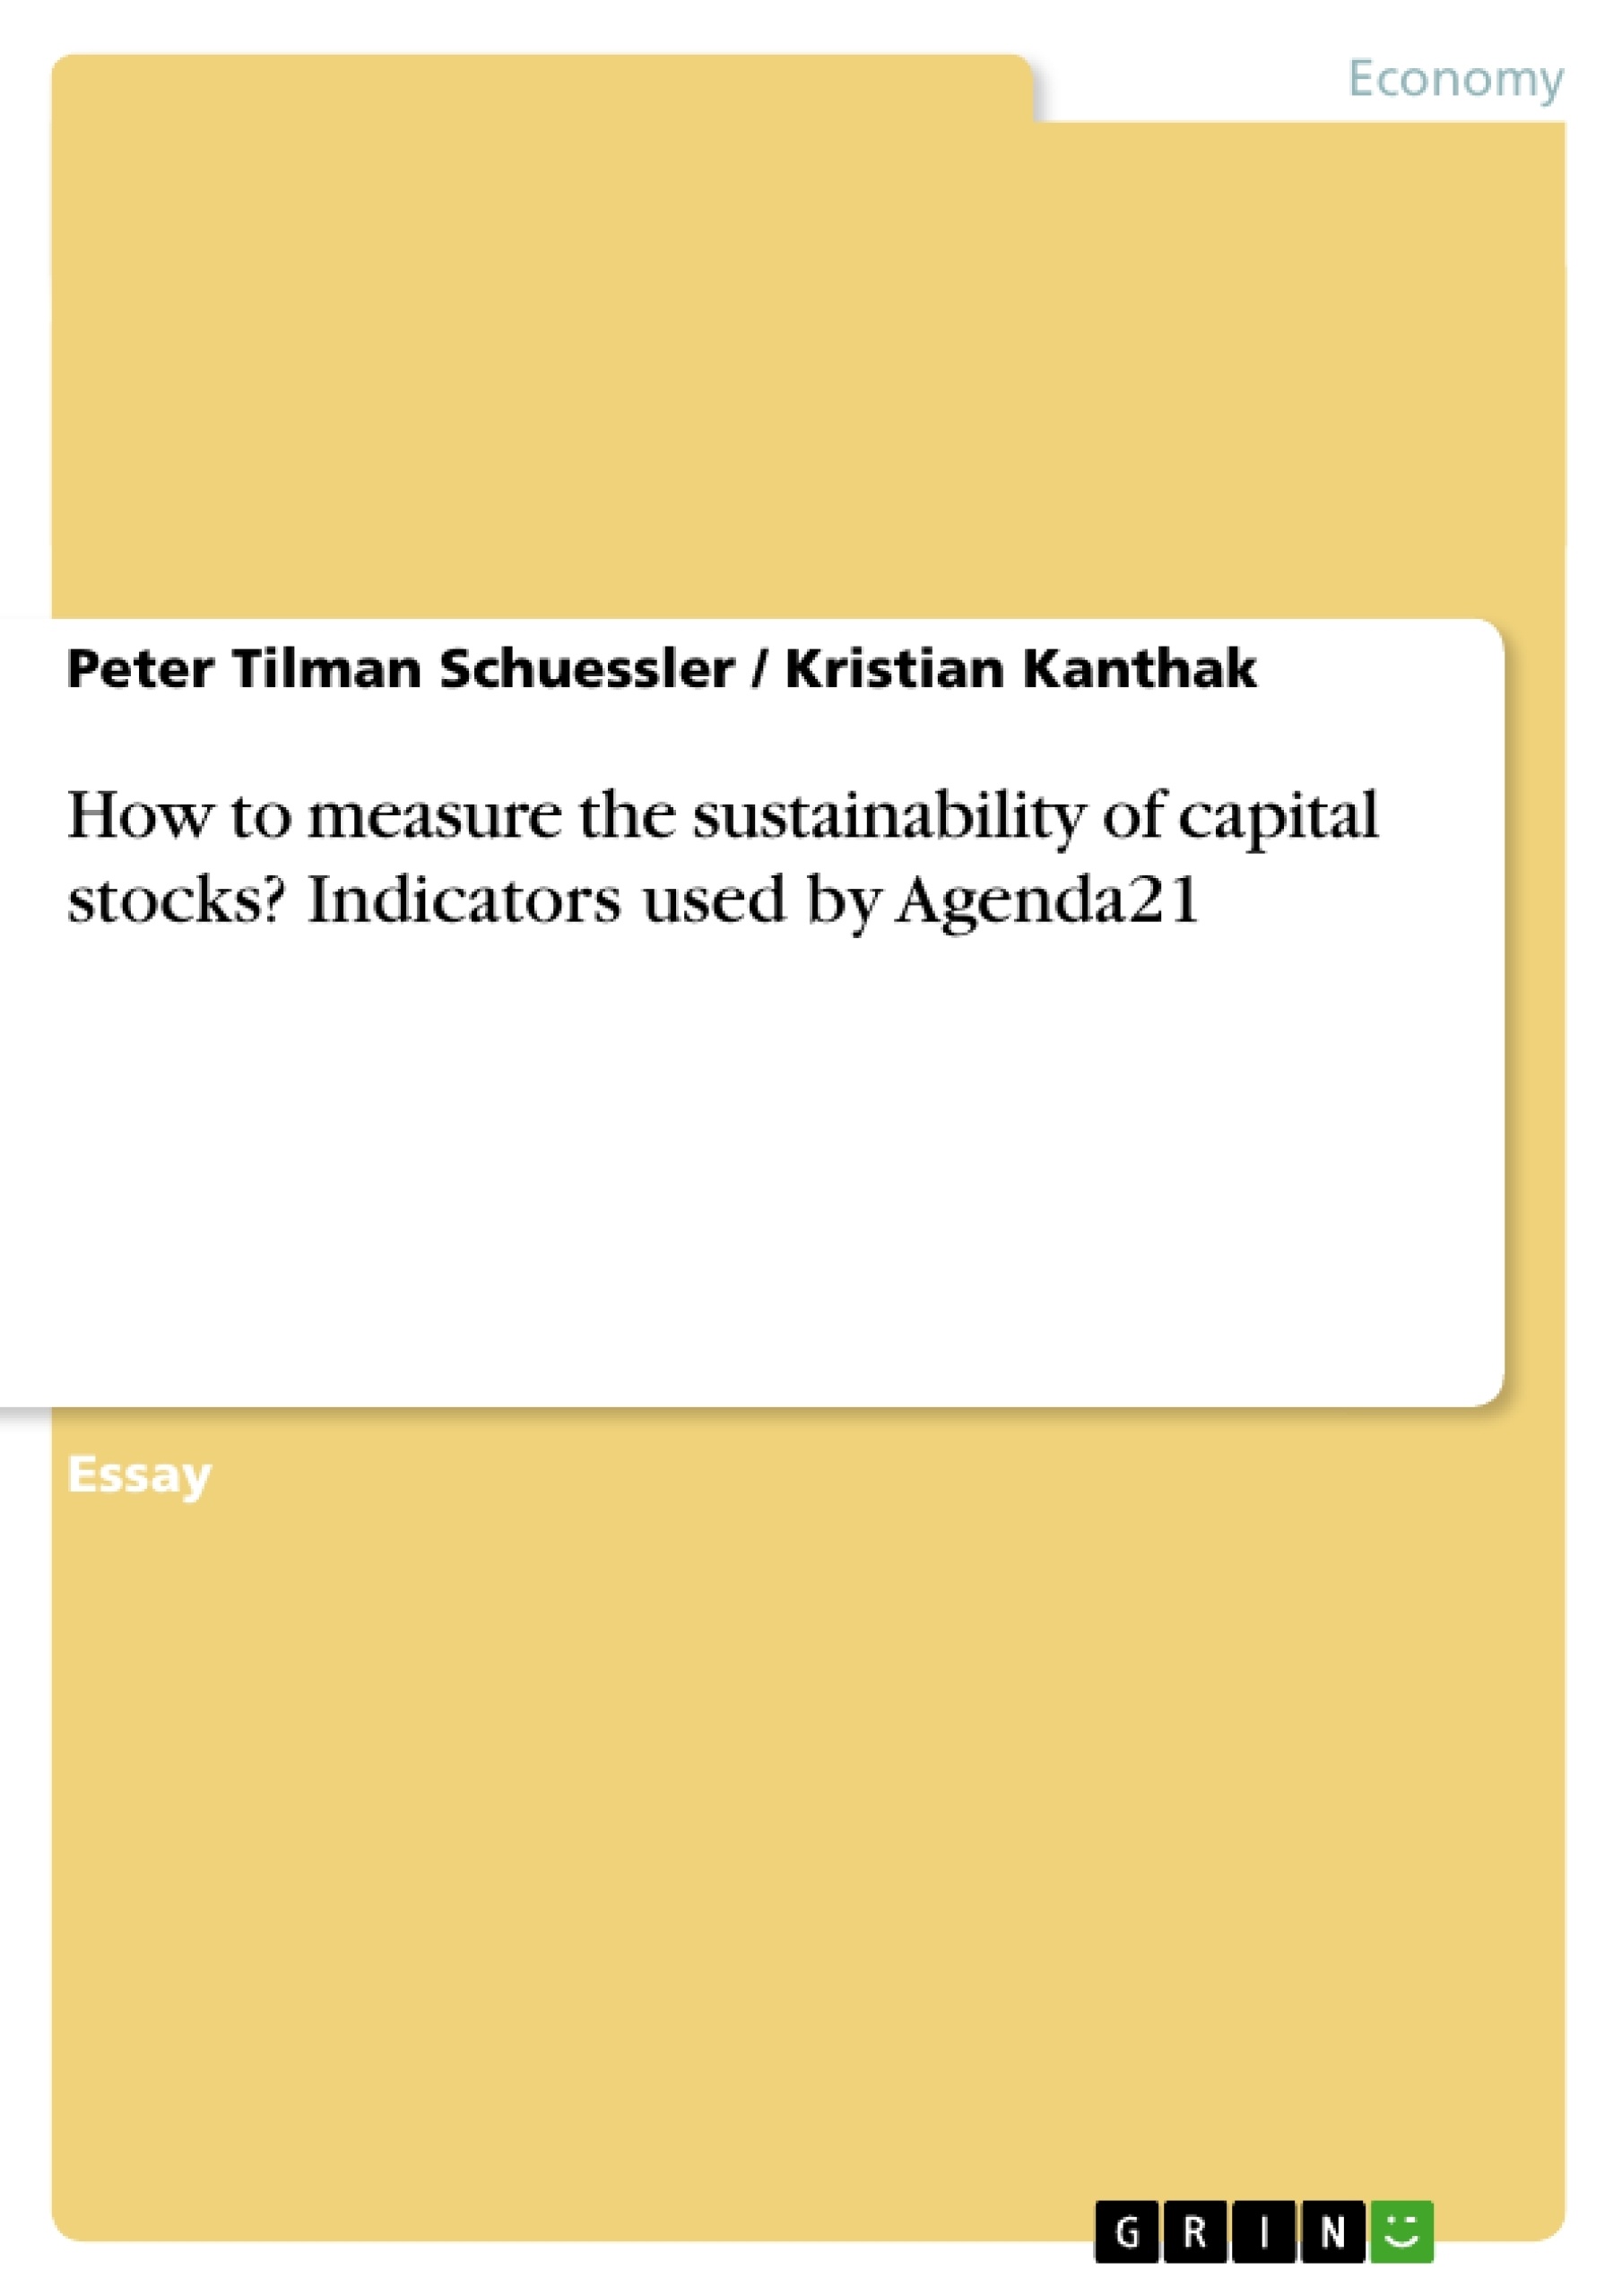 Título: How to measure the sustainability of capital stocks? Indicators used by Agenda21